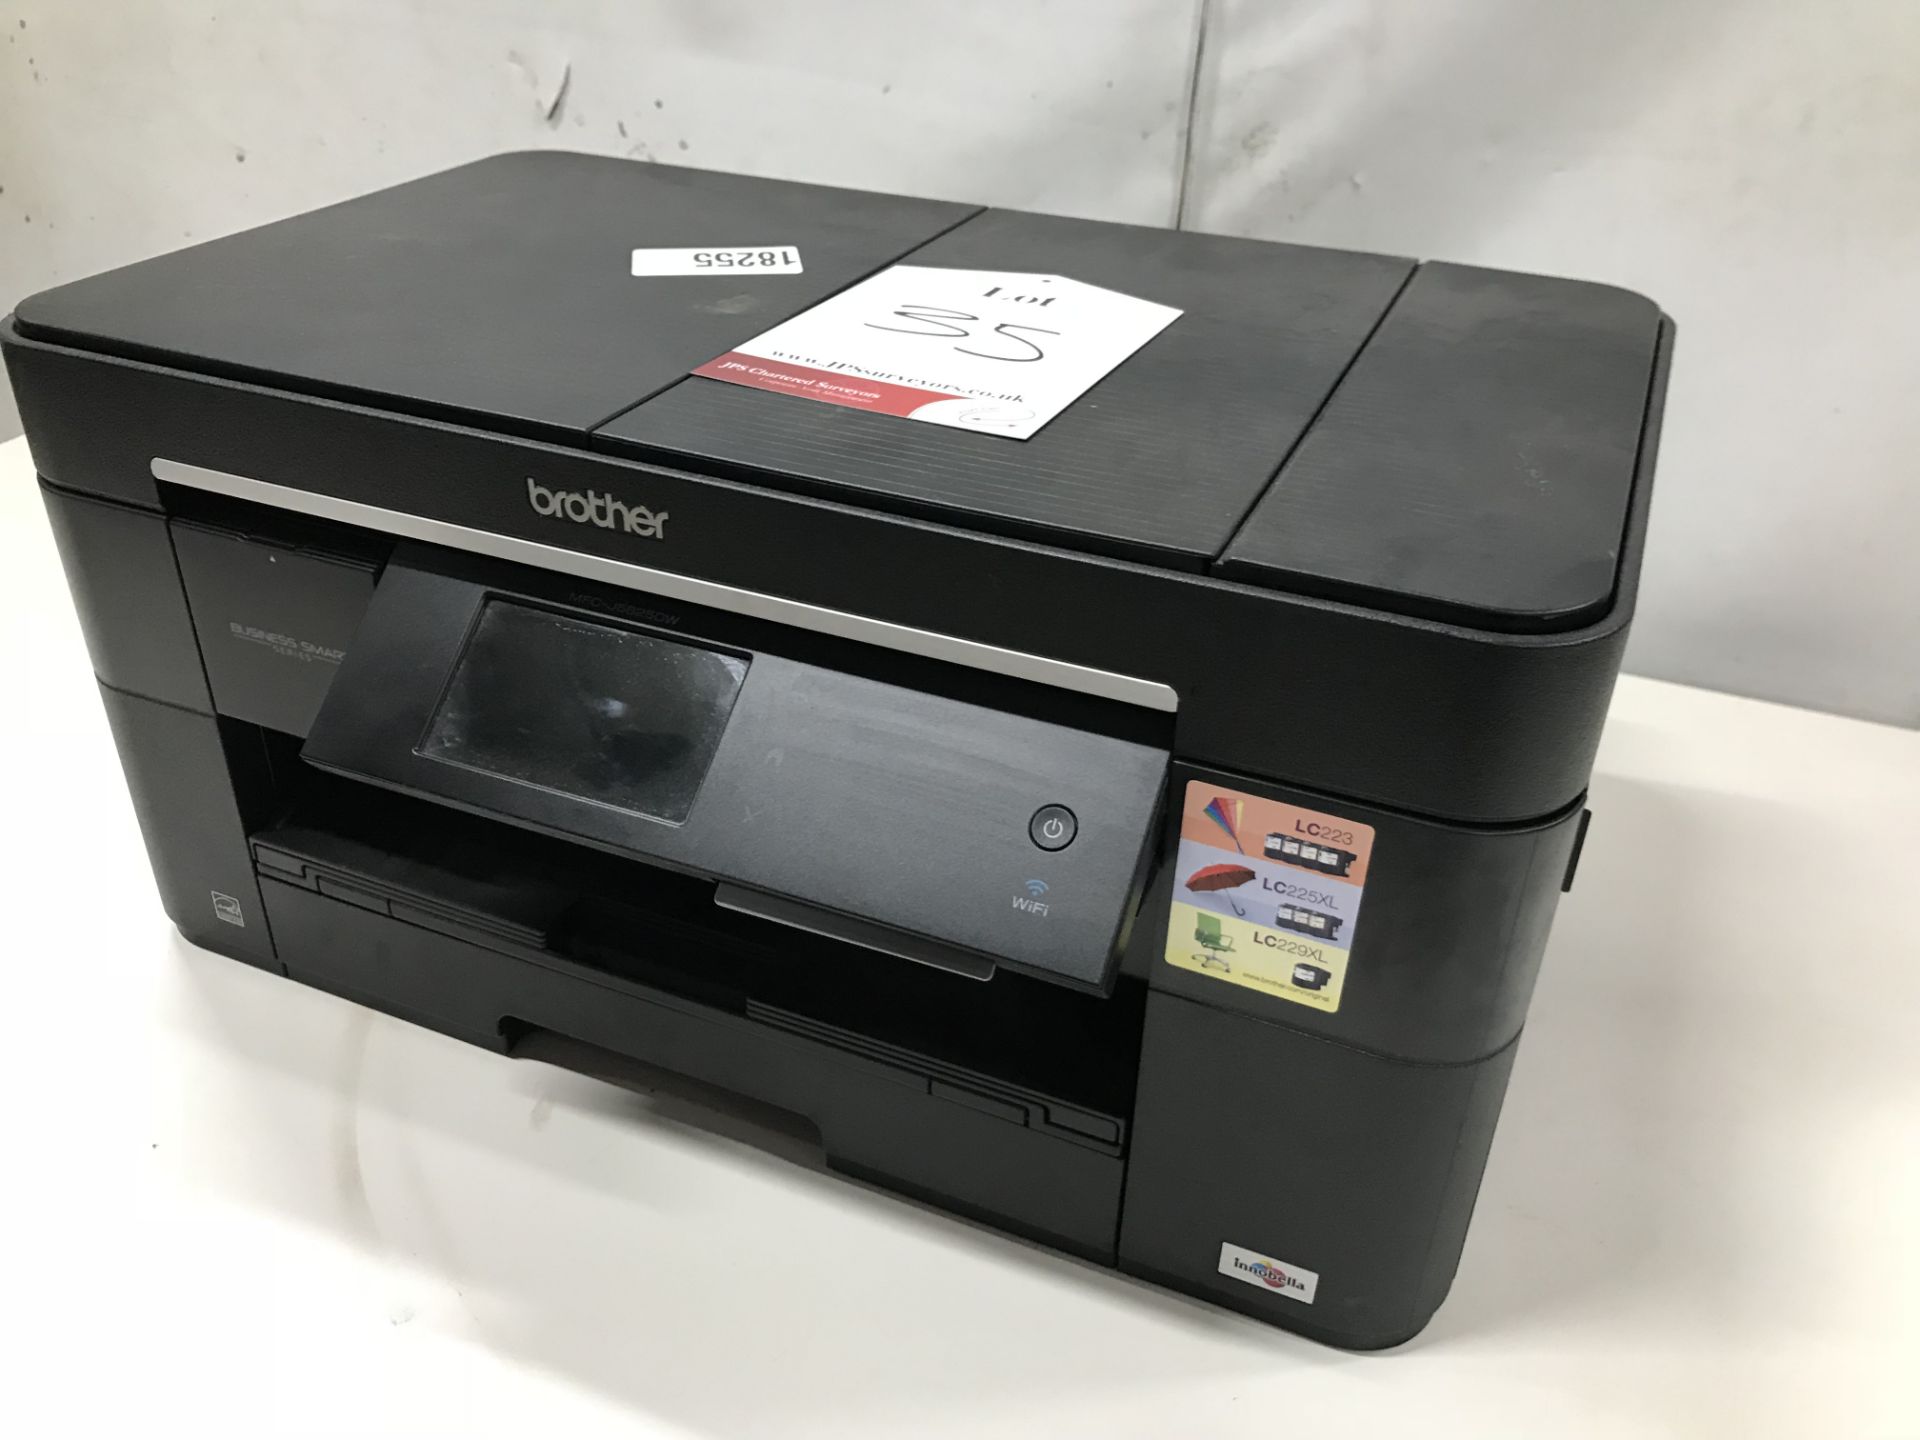 Brother MFC-J5320DW Multi-function Printer/Copier - Image 2 of 8